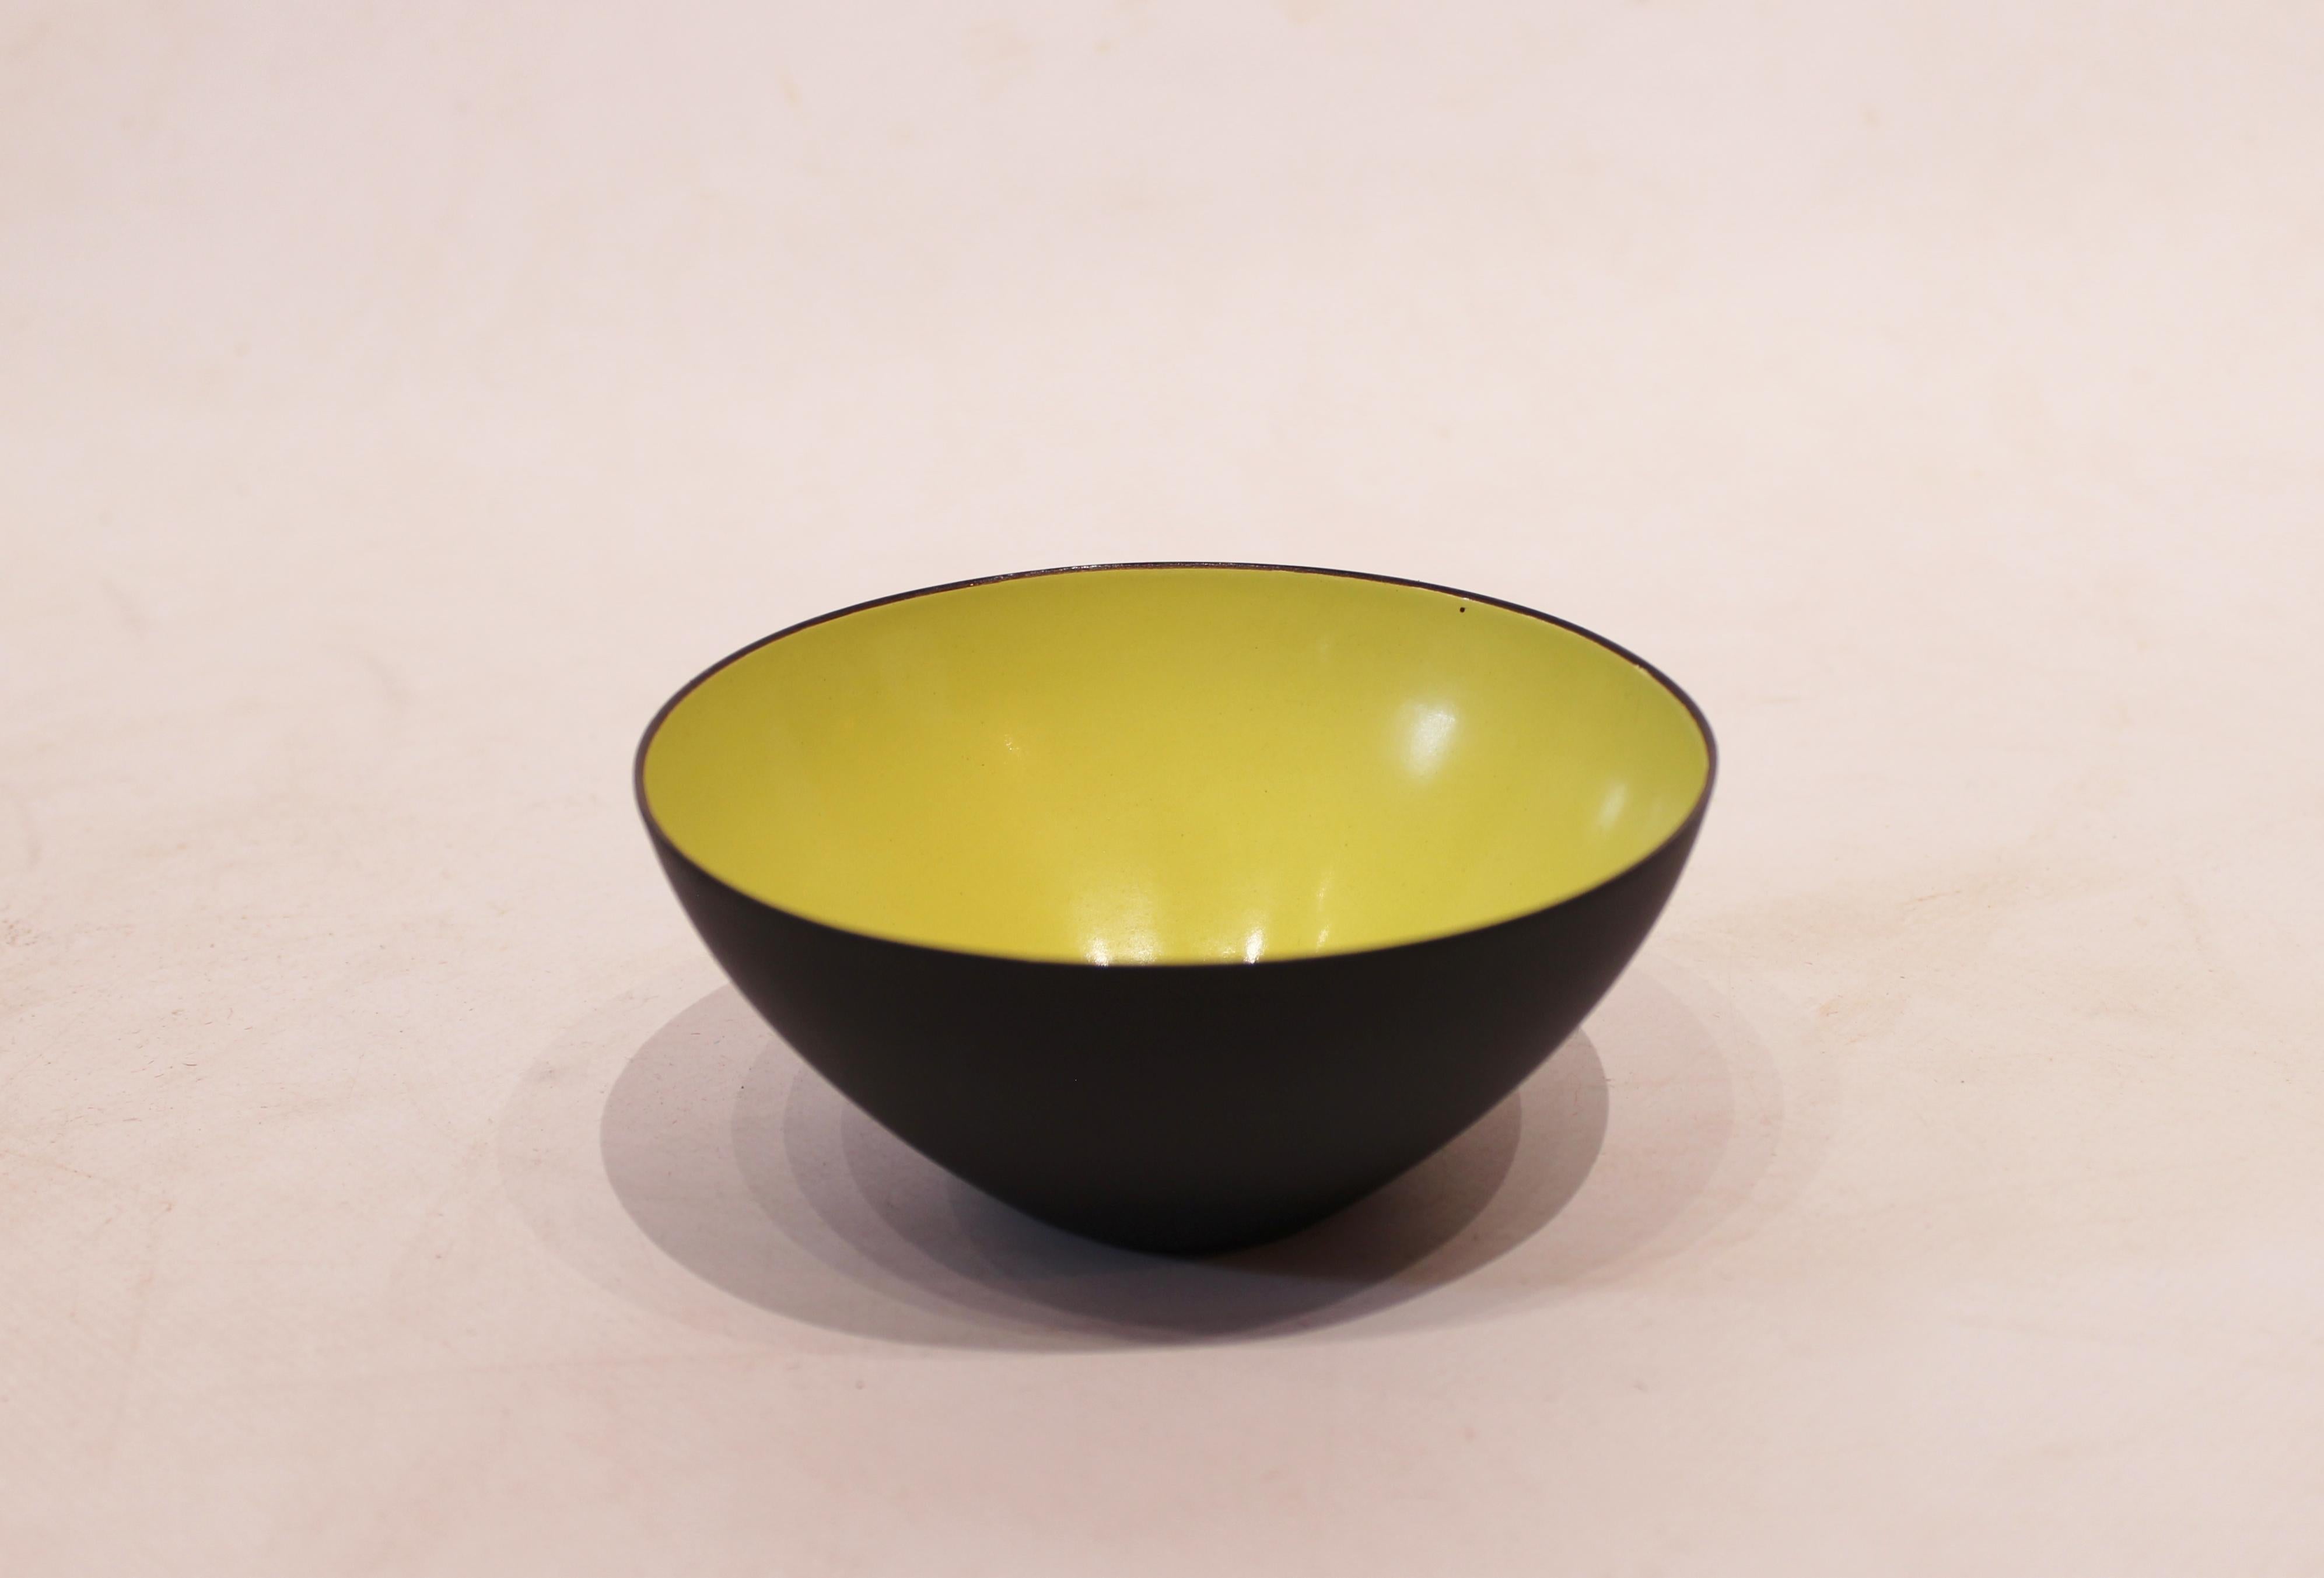 Krenit bowl by Herbert Krenchel from the 1960s. The bowl is of Danish design and in great vintage condition. The item is decorated with black metal on the exterior and light green enamel on the interior.